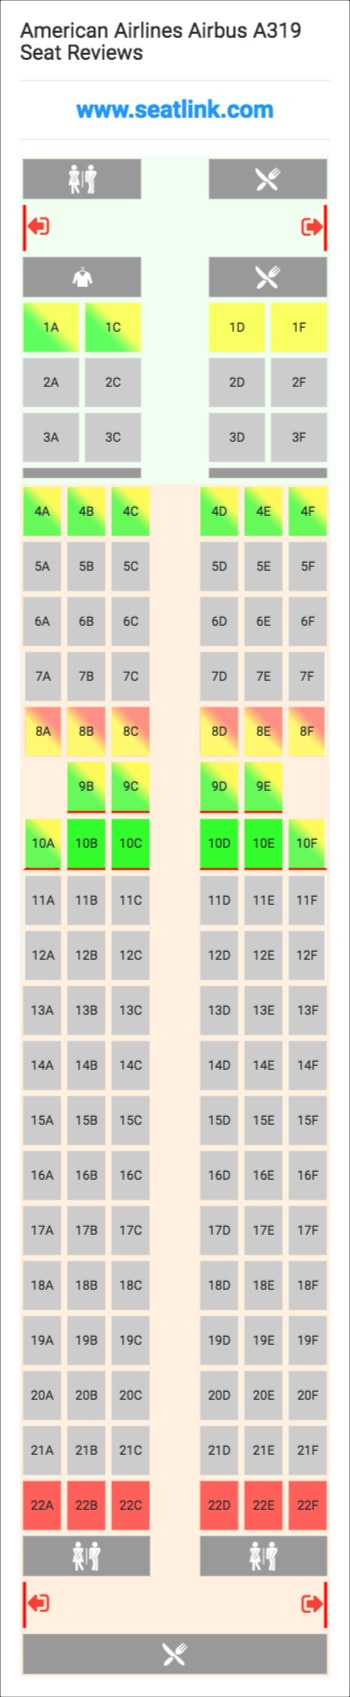 American Airlines Airbus A319 Seating Chart Updated August 2020